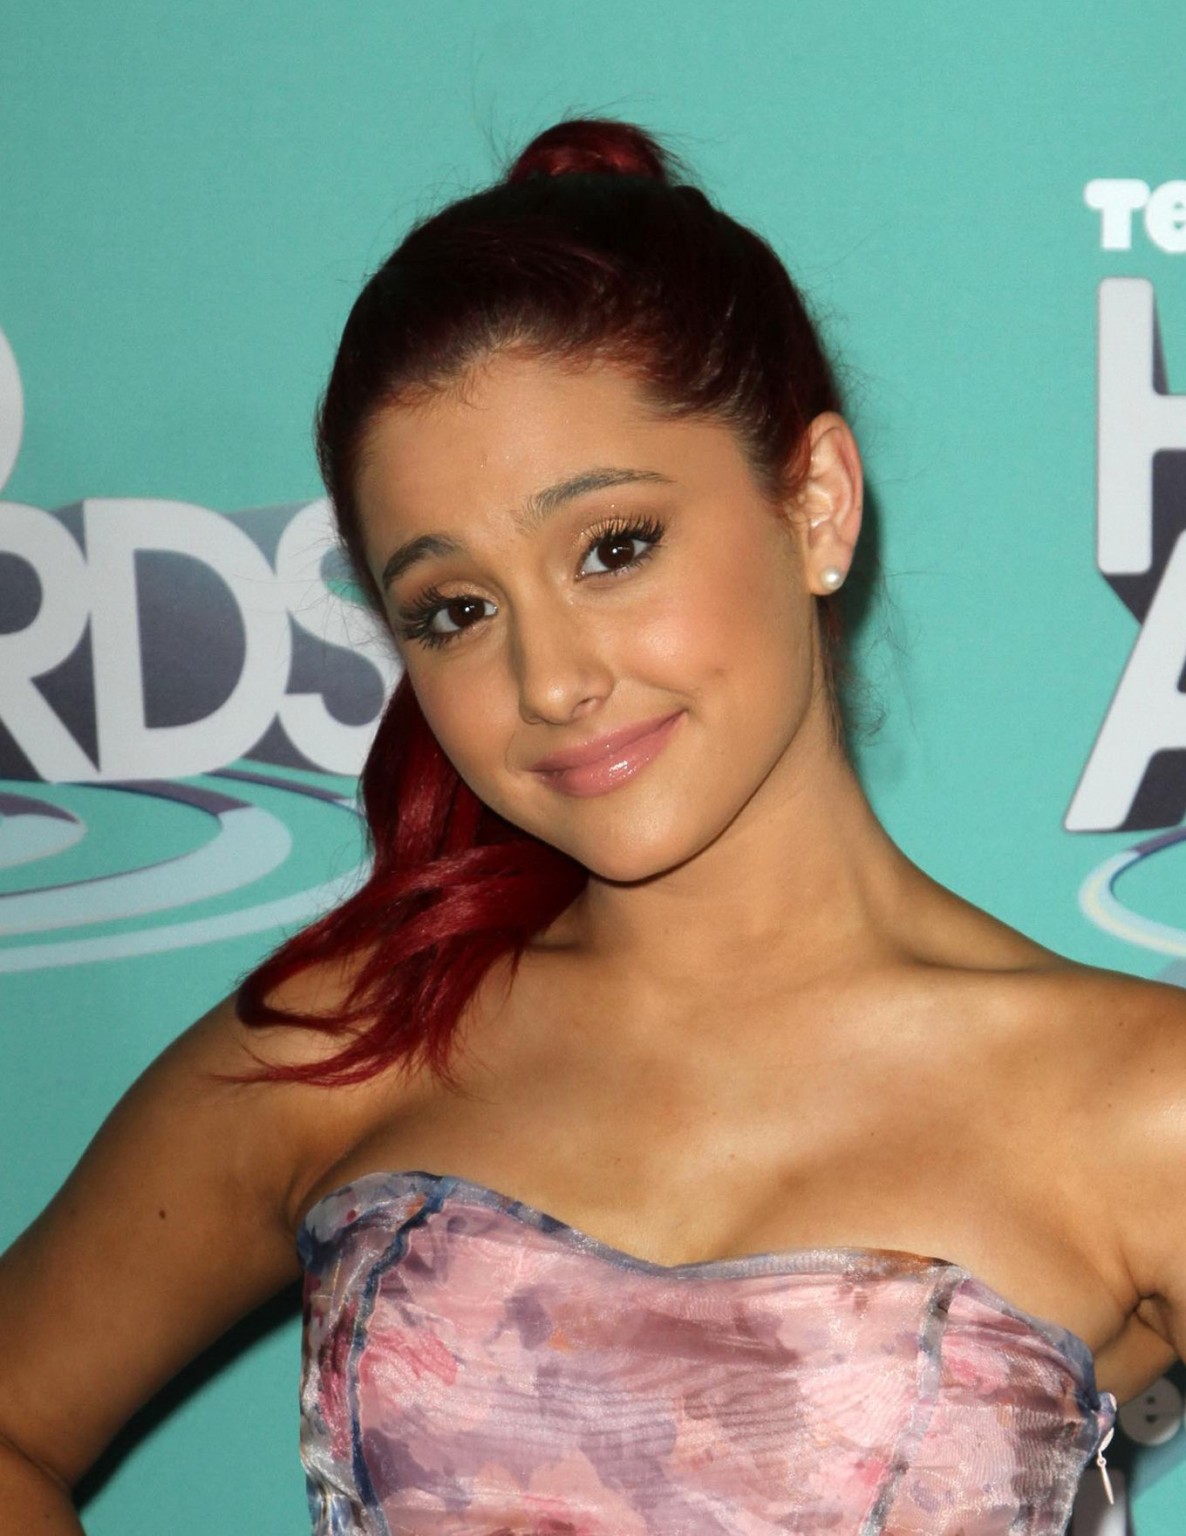 Ariana Grande looking very cute at the TeenNick HALO Awards in Los Angeles #75284414